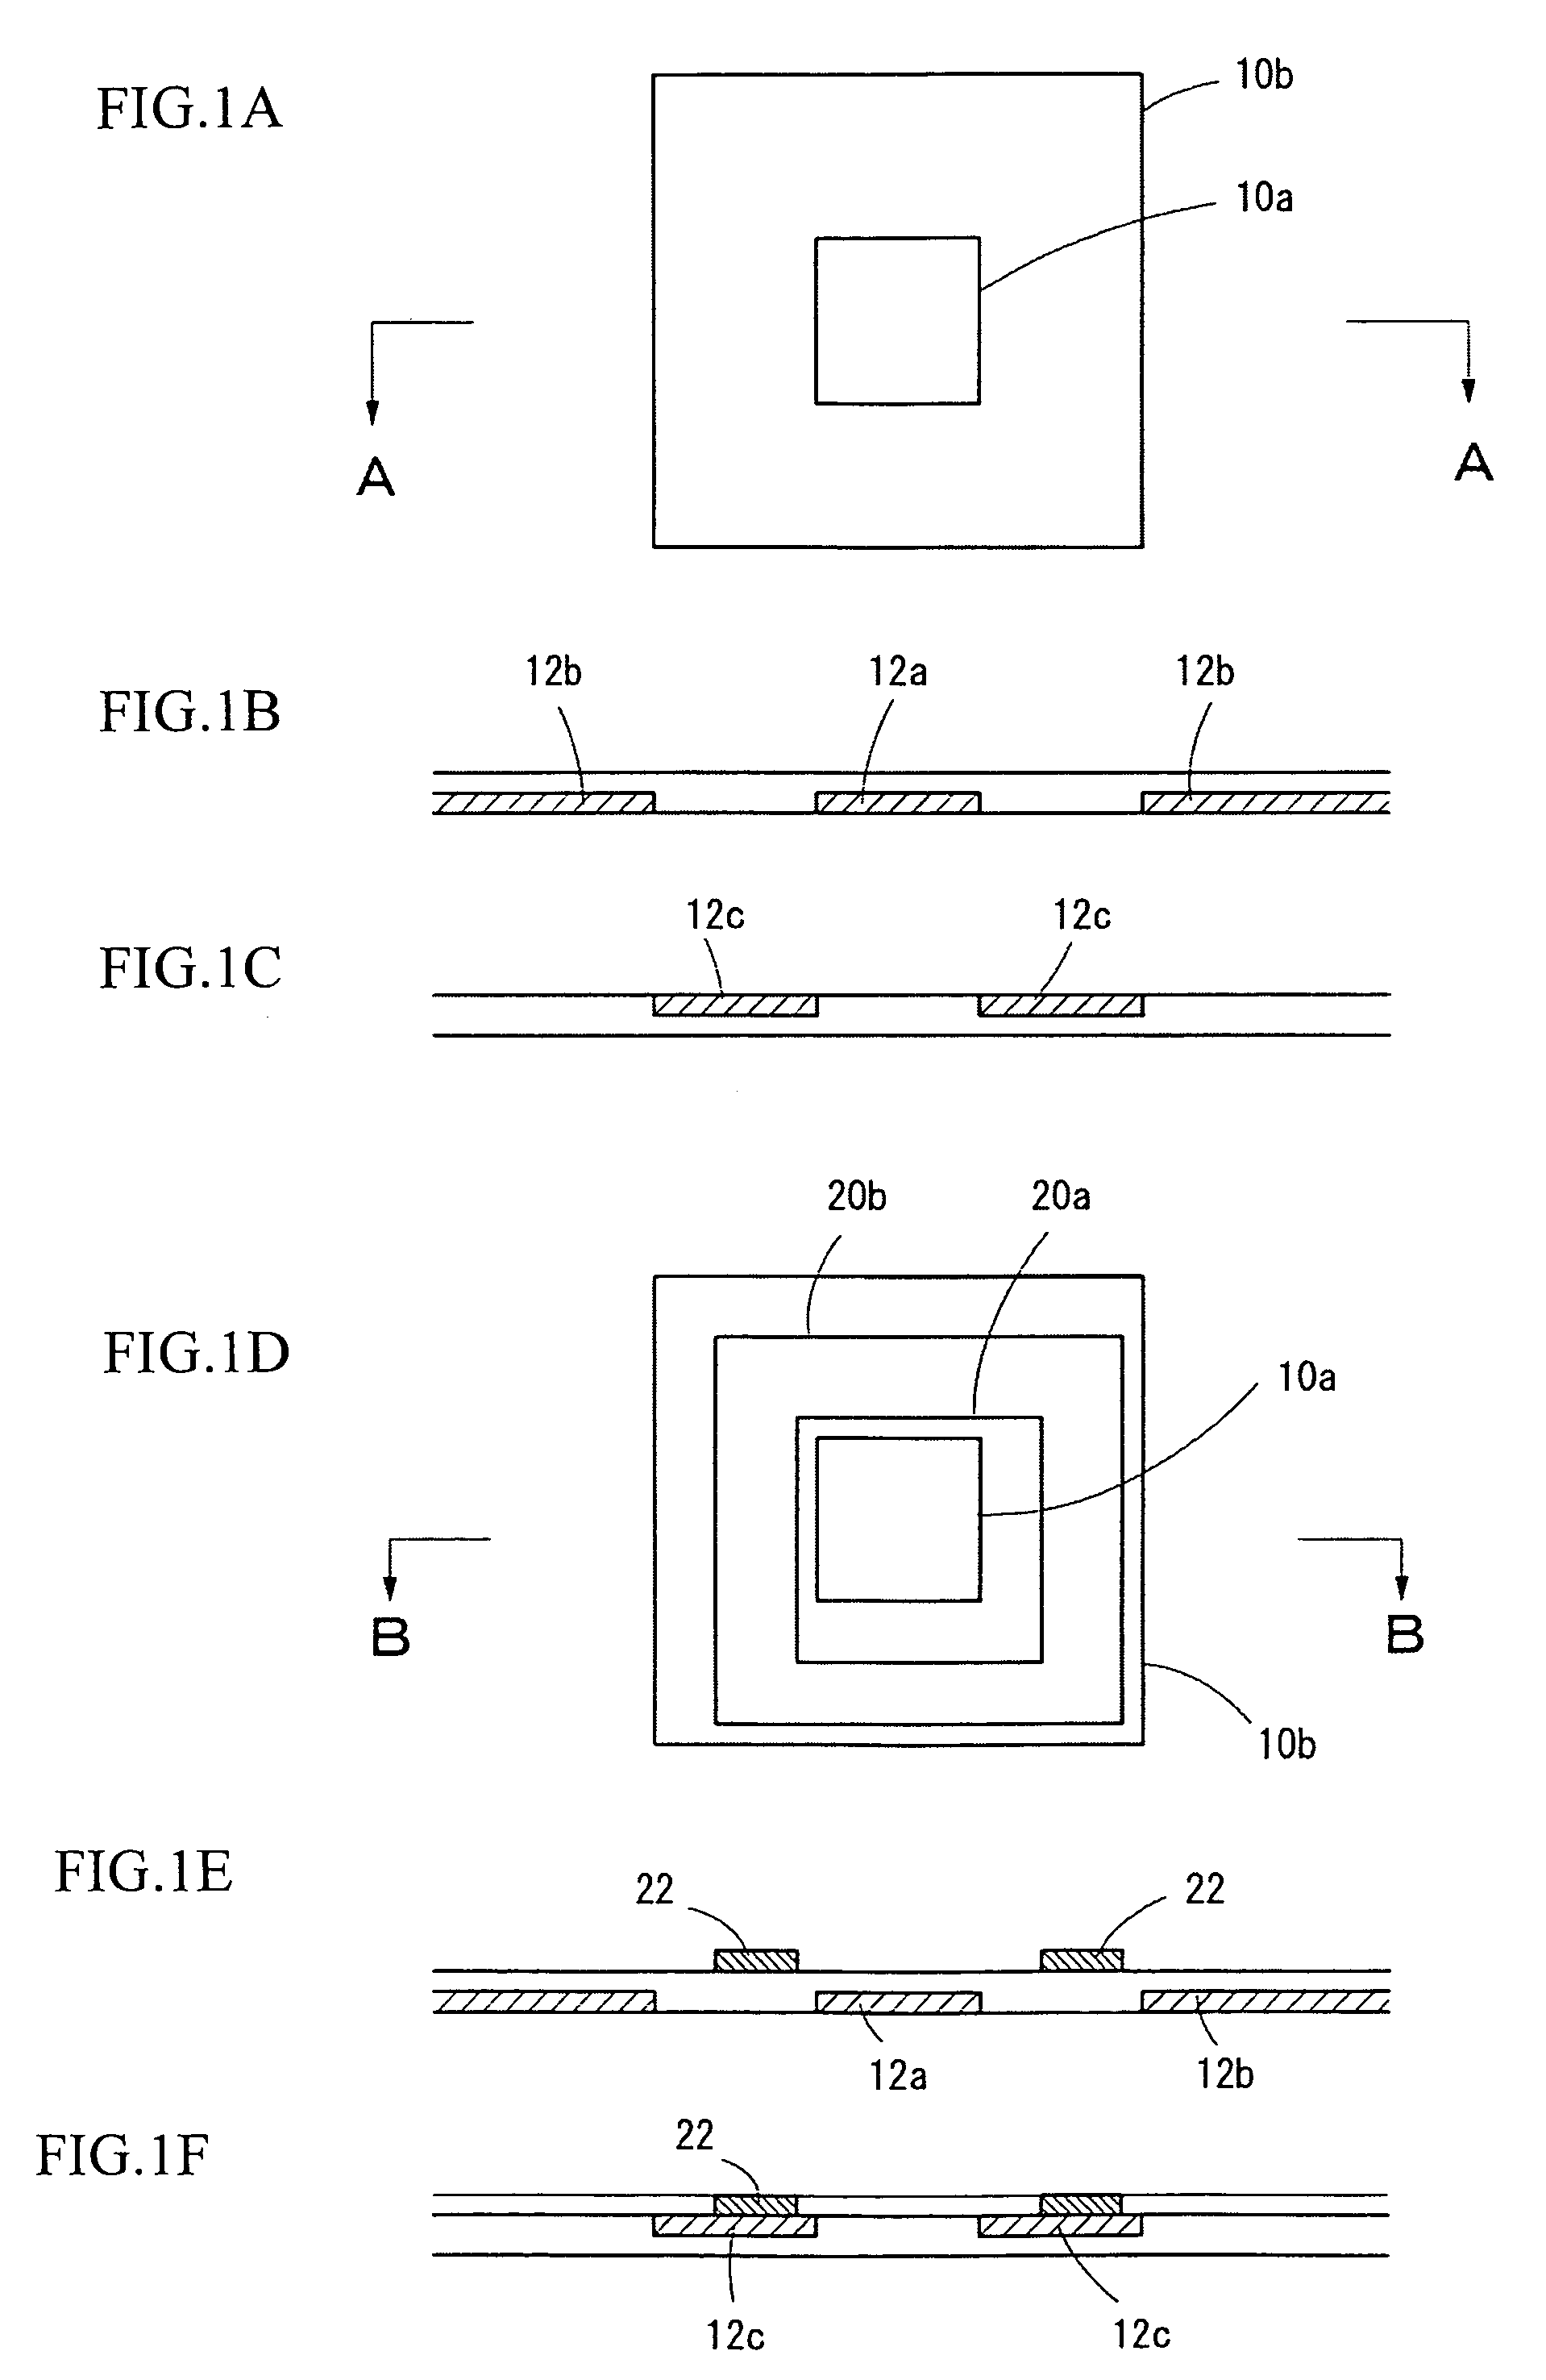 Method of detecting displacement of exposure position marks